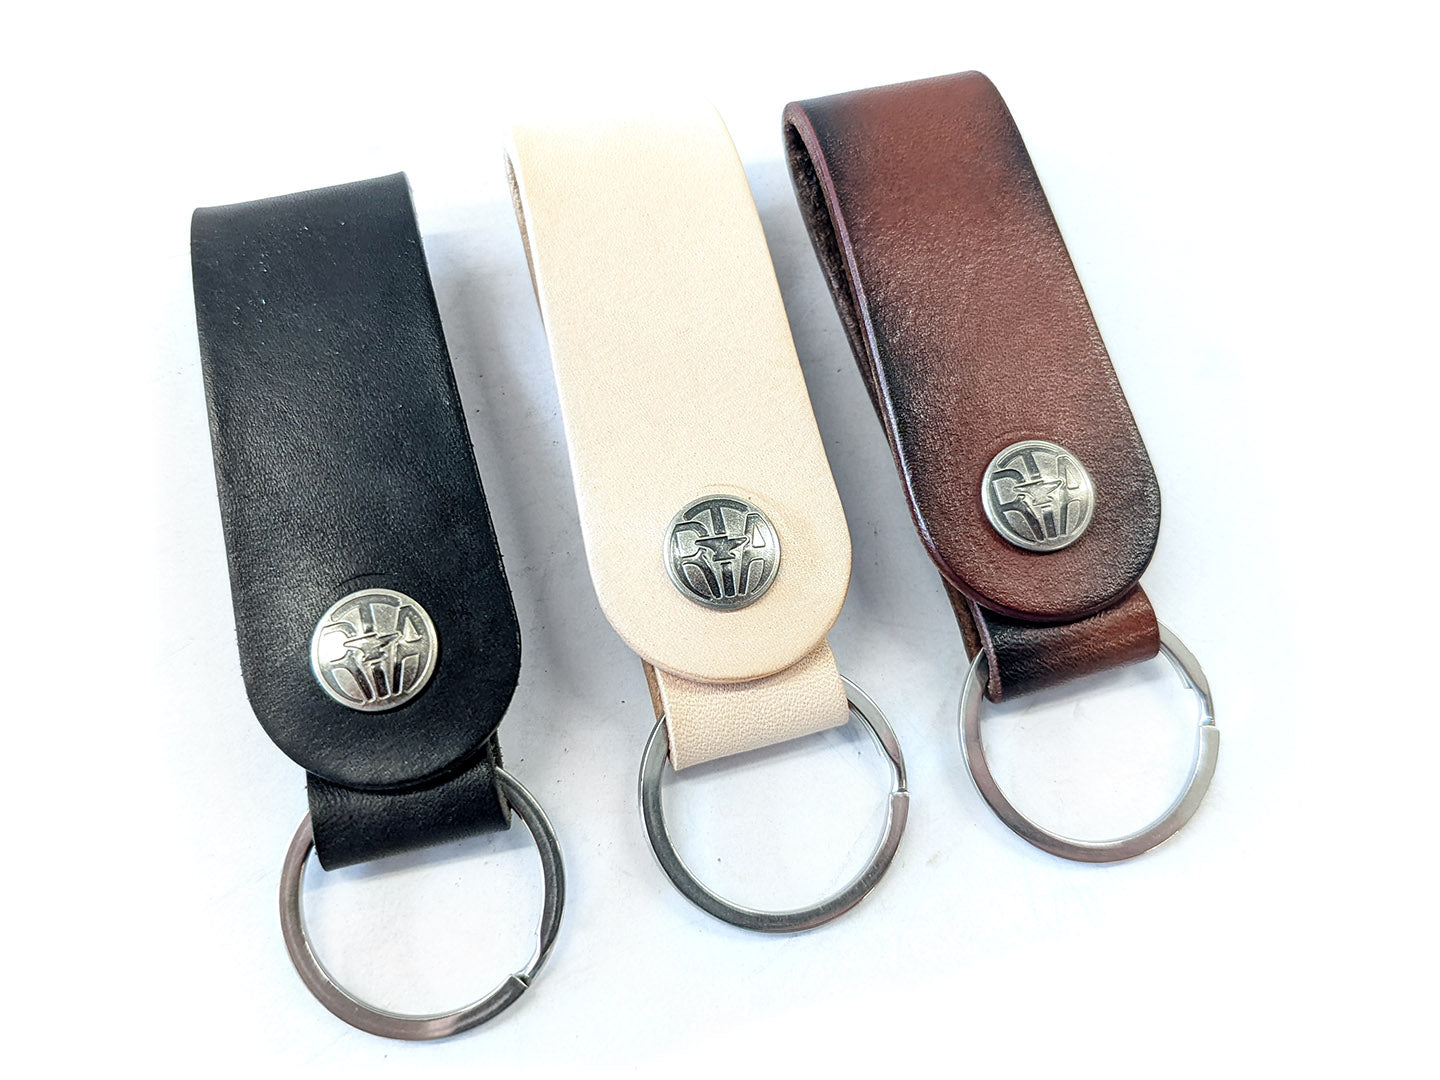 Belt loop, attach your keychain to your belt.